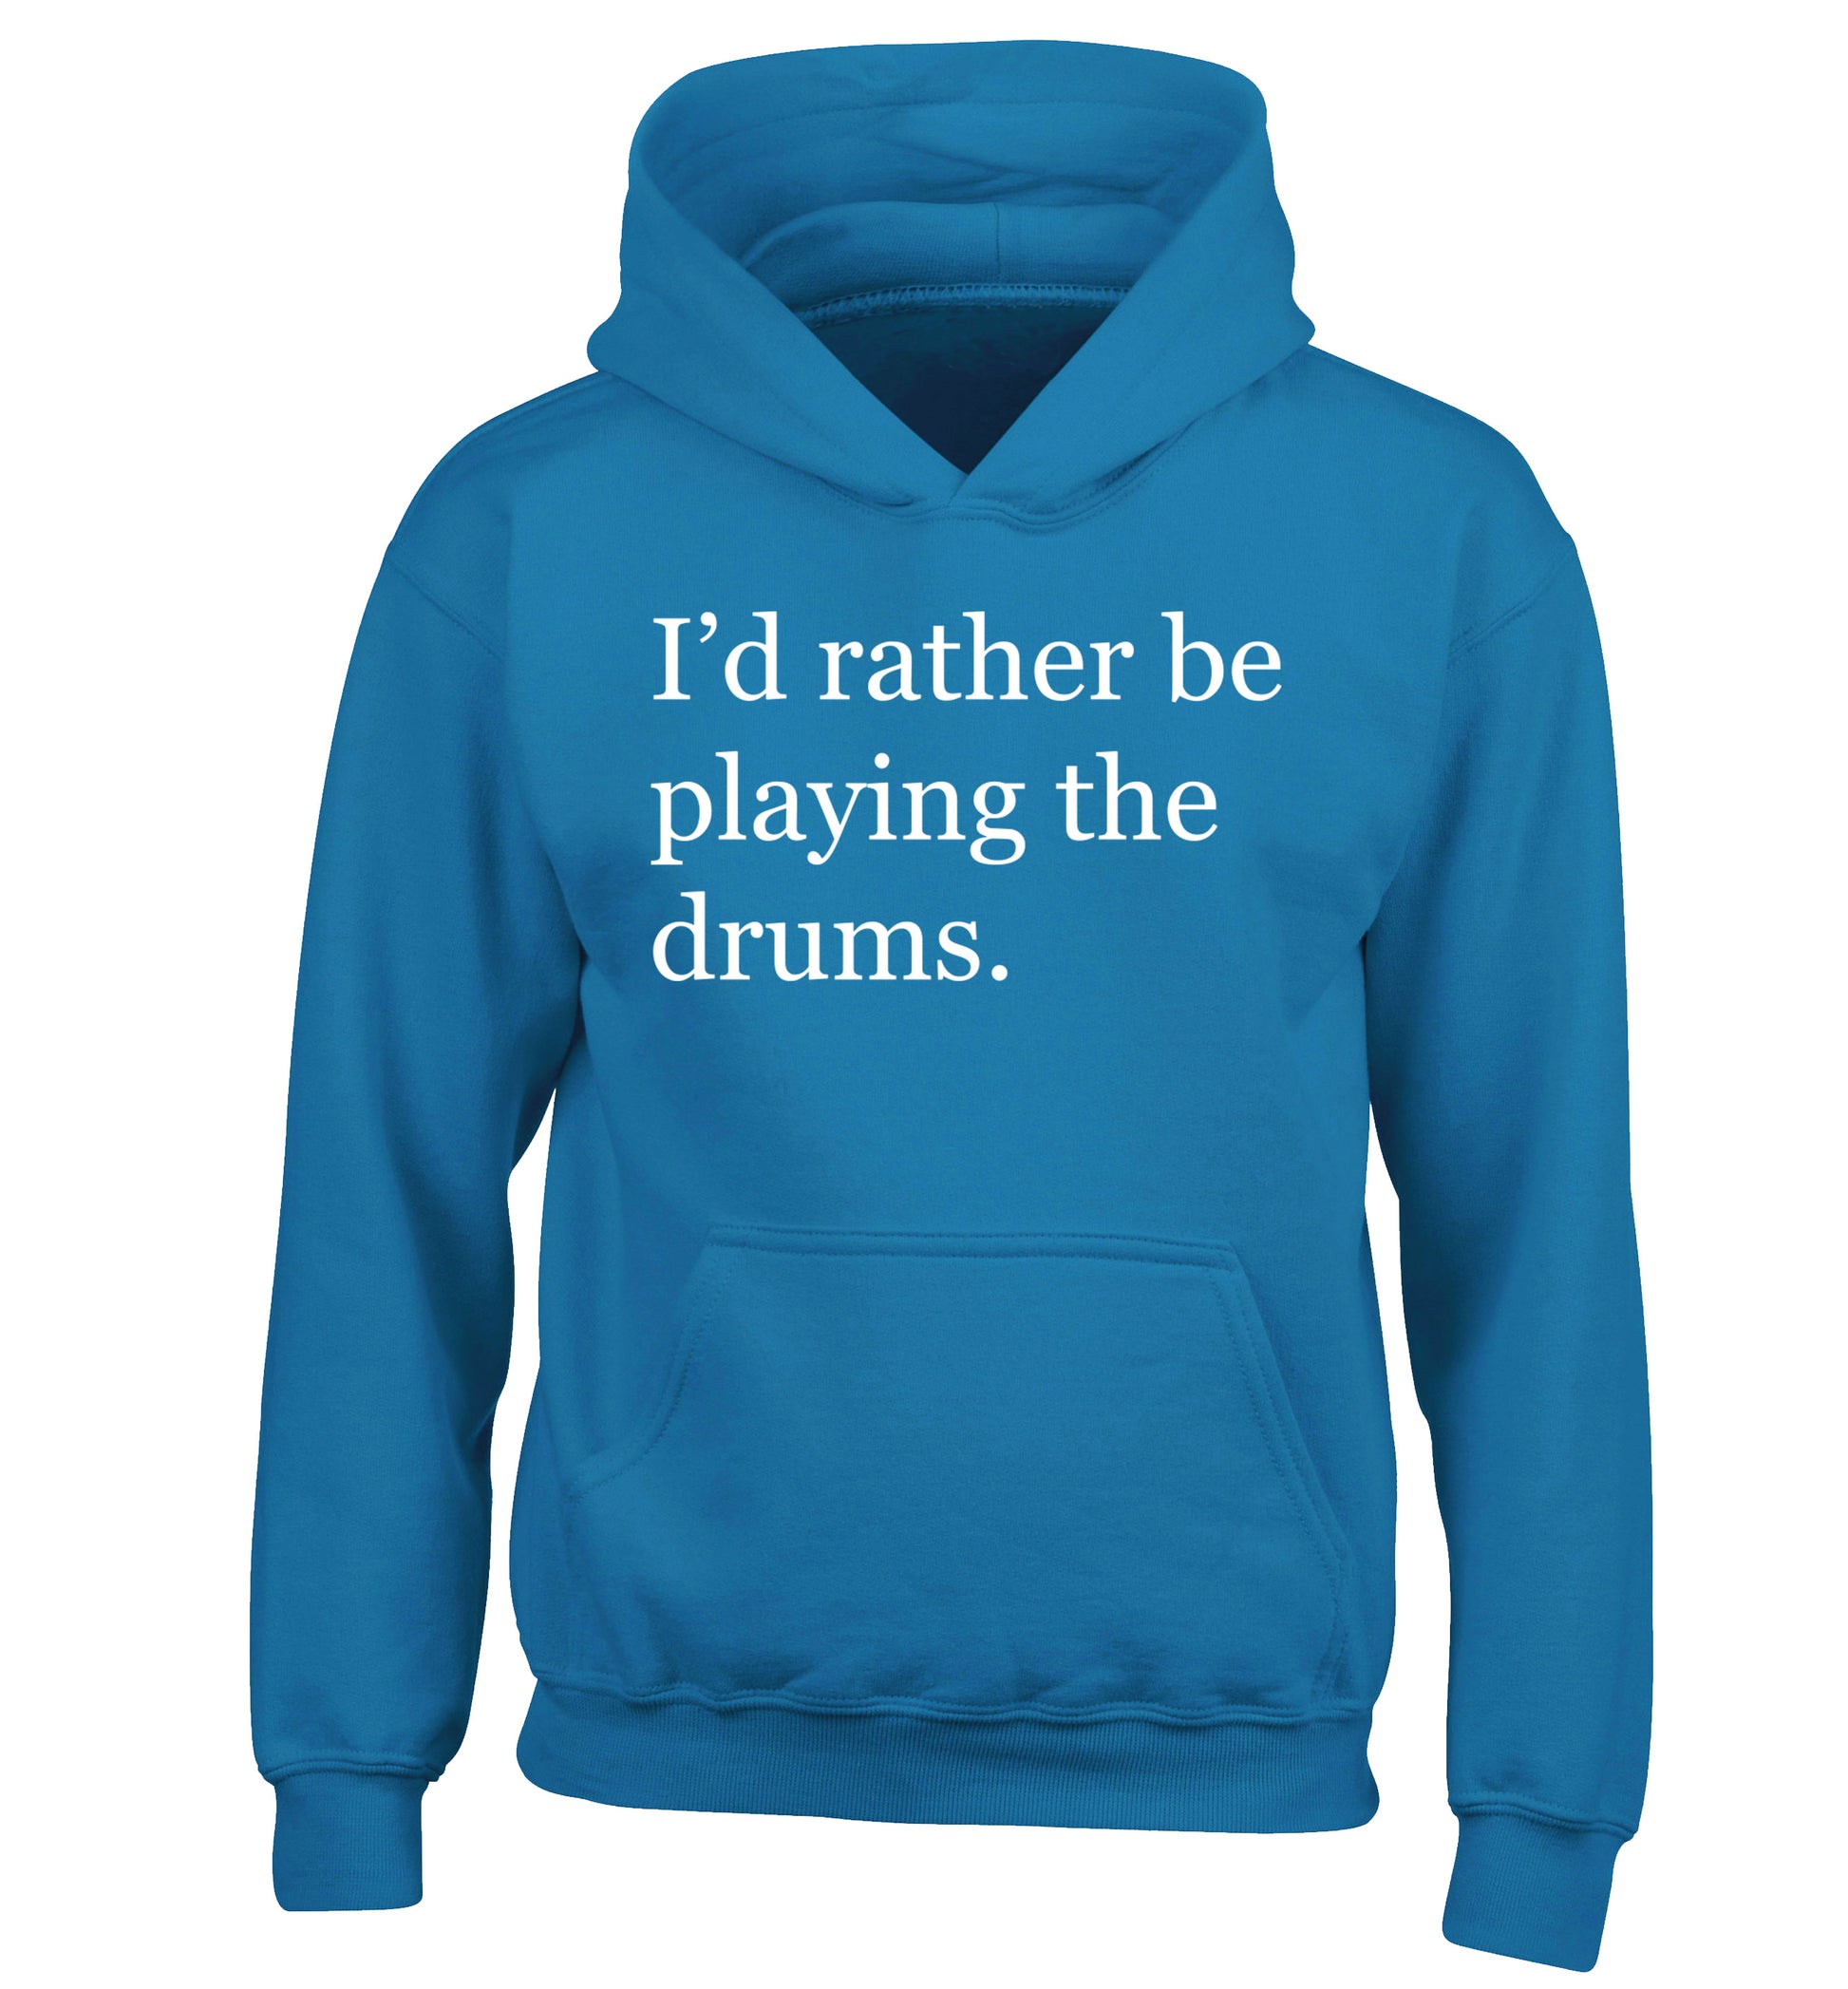 I'd rather be playing the drums children's blue hoodie 12-14 Years